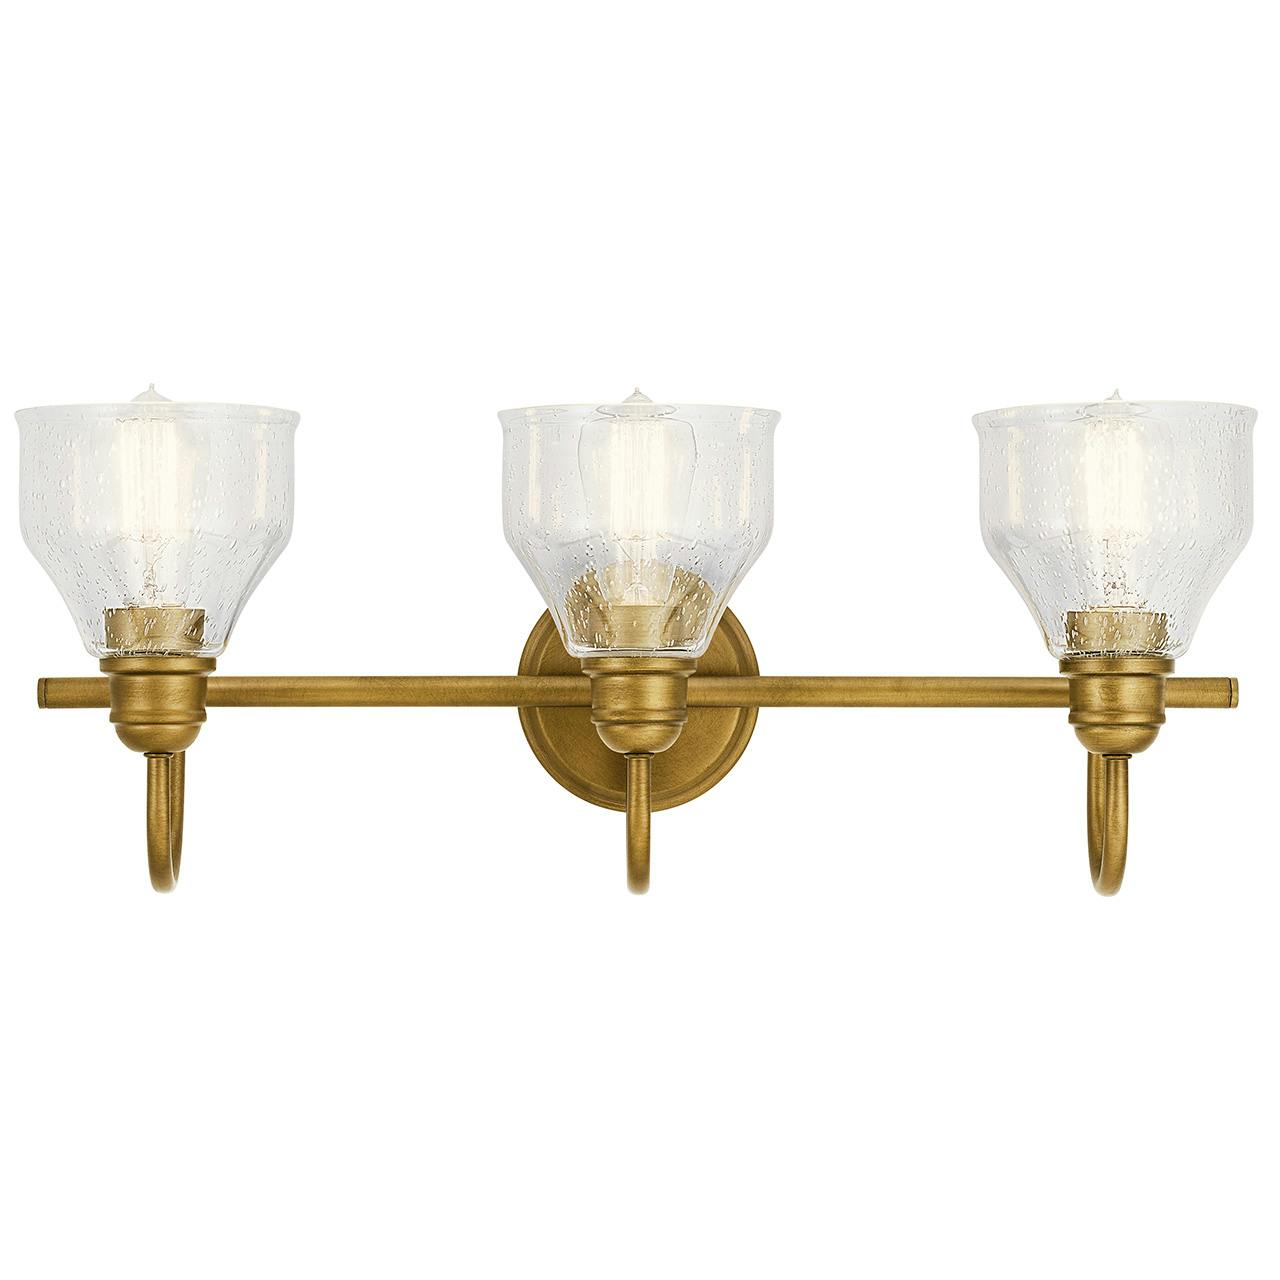 The Avery 3 Light Vanity Light Natural Brass facing up on a white background